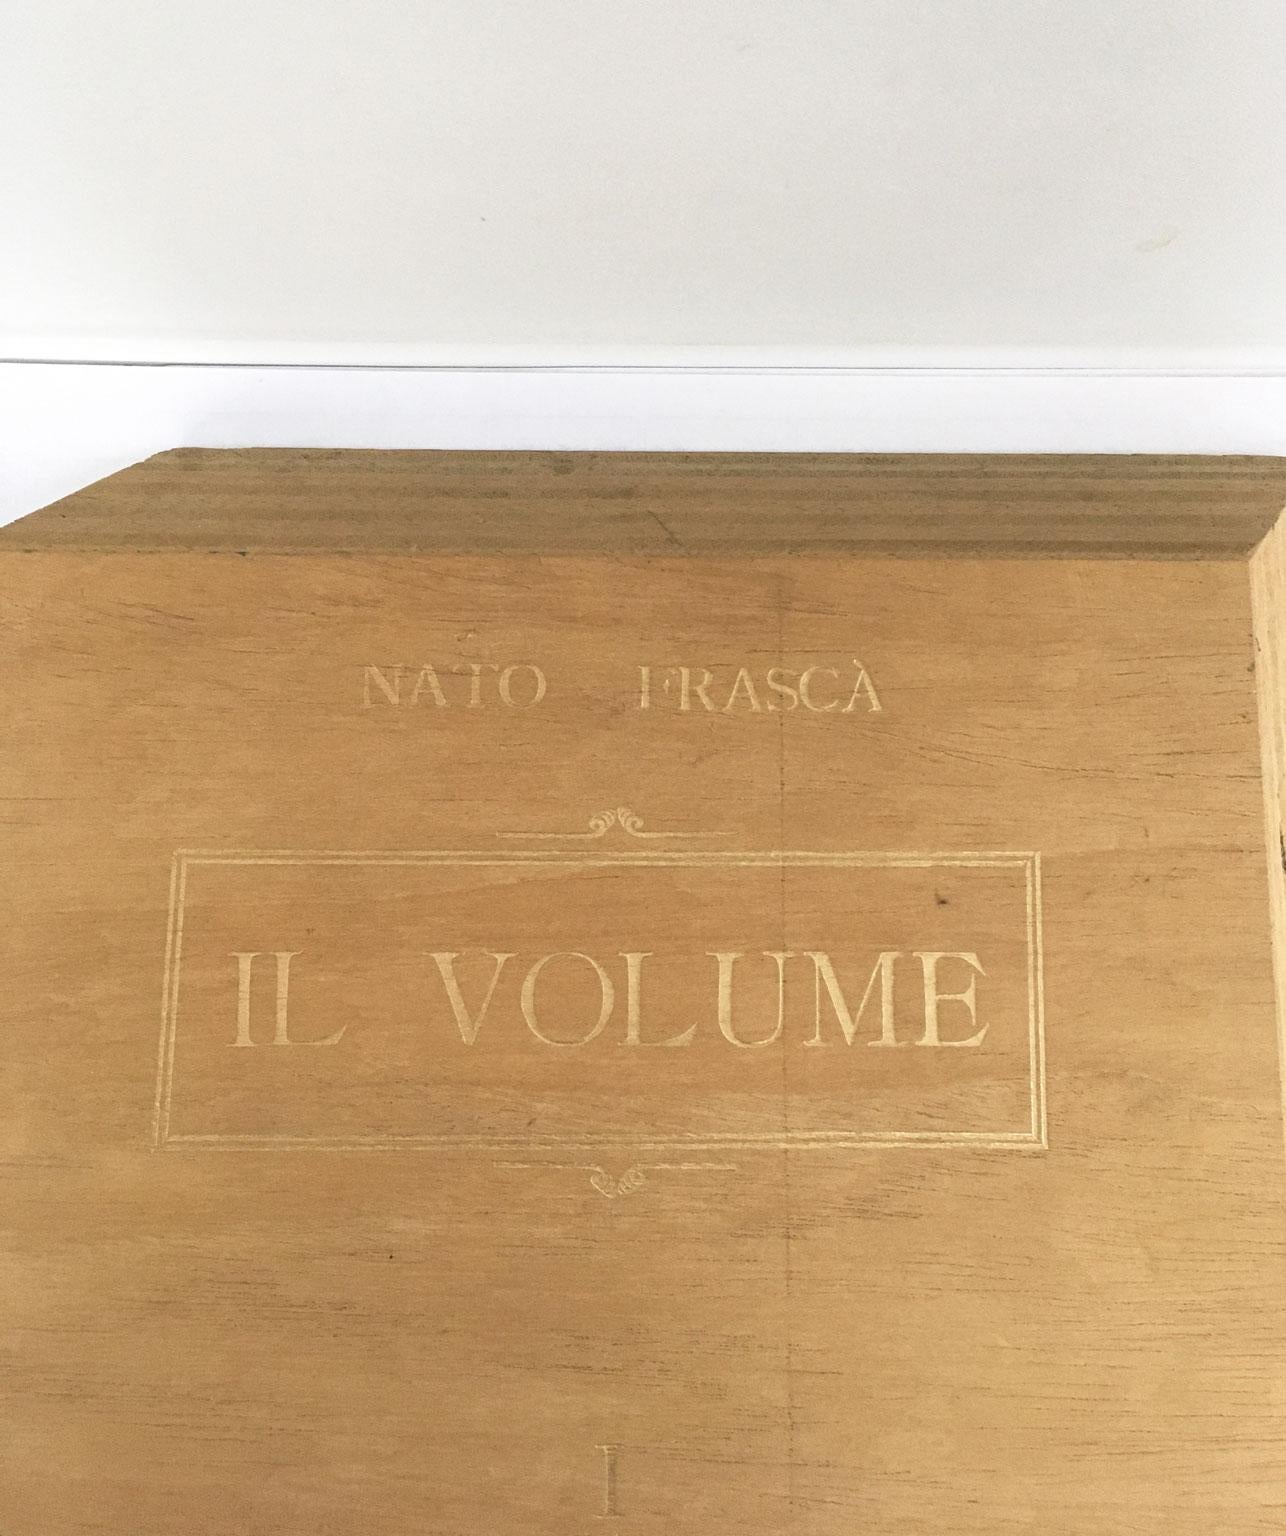 1975 Italy Abstract Wooden Sculpture by Nato Frascà Il Volume The Book For Sale 2